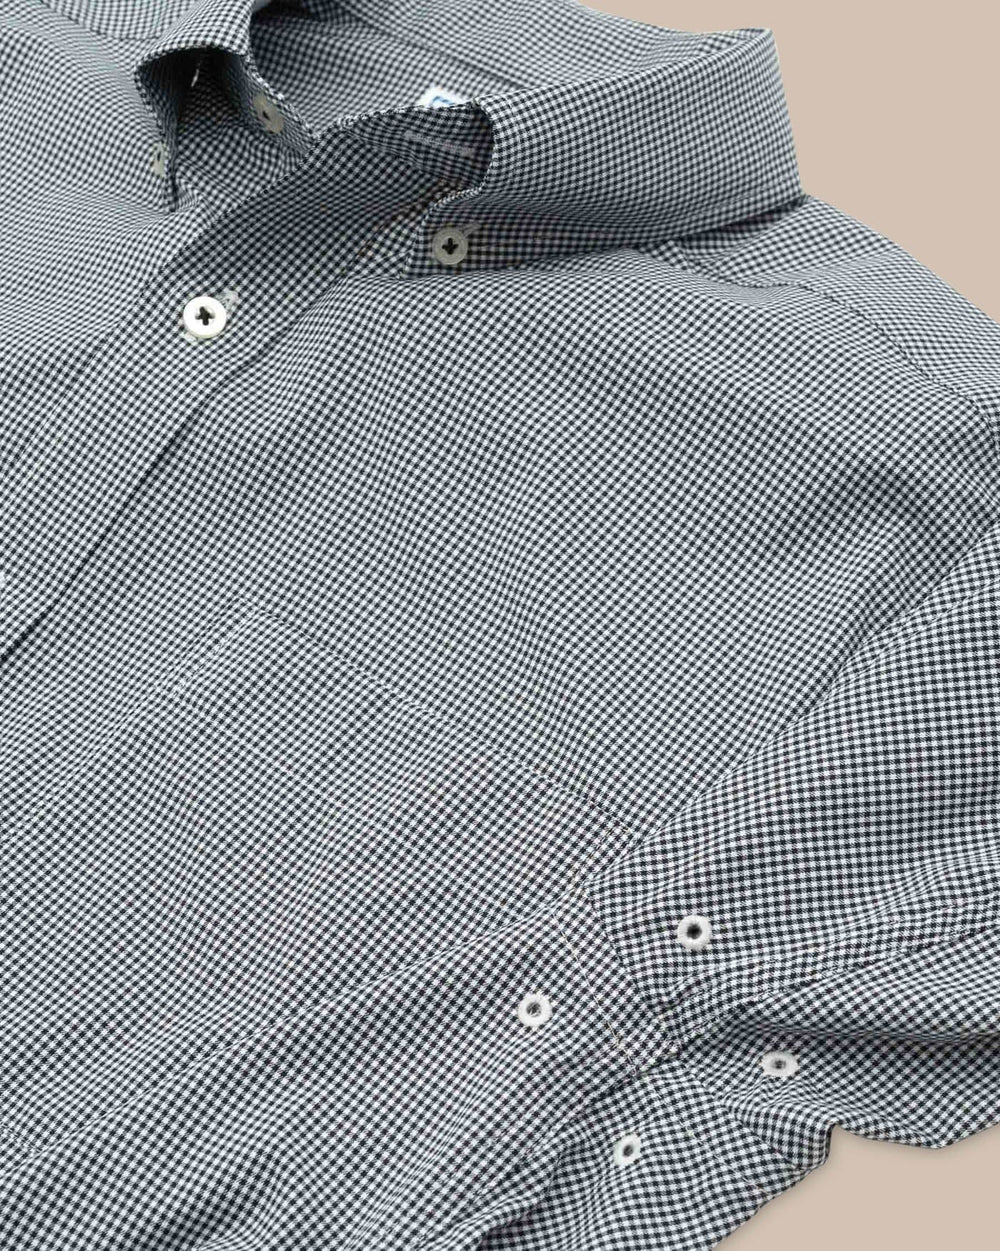 The detail view of the Southern Tide Team Colors Gingham Intercoastal Sport Shirt by Southern Tide - Black